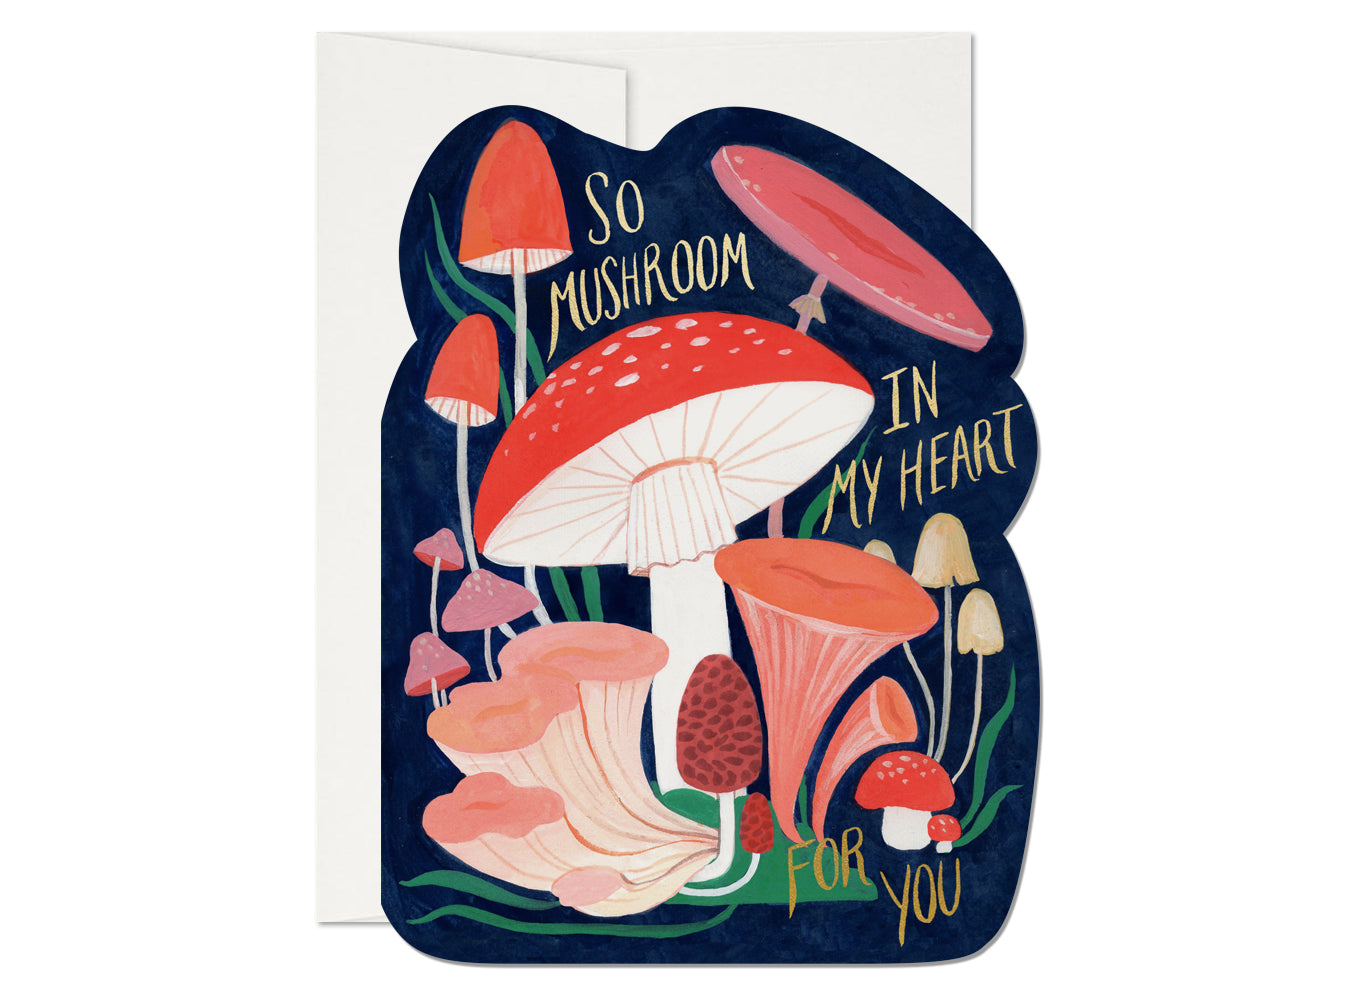 die cut card featuring mushrooms and it says so mushroom in my heart for you